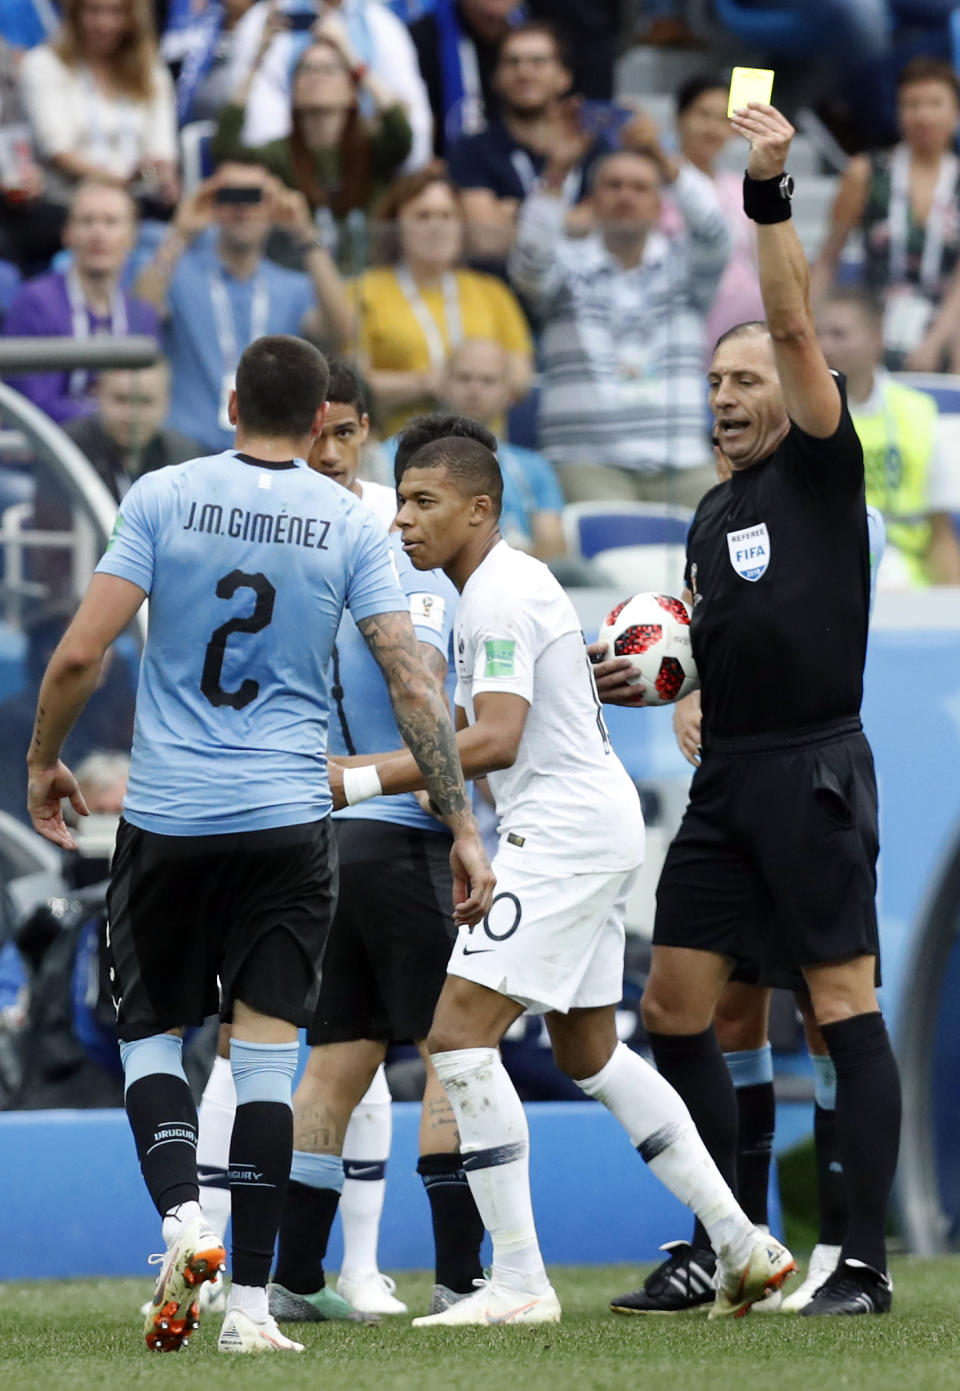 France’s Kylian Mbappe, center, receives a yellow card by referee Nestor Pitana during the quarterfinal match between Uruguay and France at the 2018 soccer World Cup in the Nizhny Novgorod Stadium, in Nizhny Novgorod, Russia, Friday, July 6, 2018. (AP Photo/David Vincent)